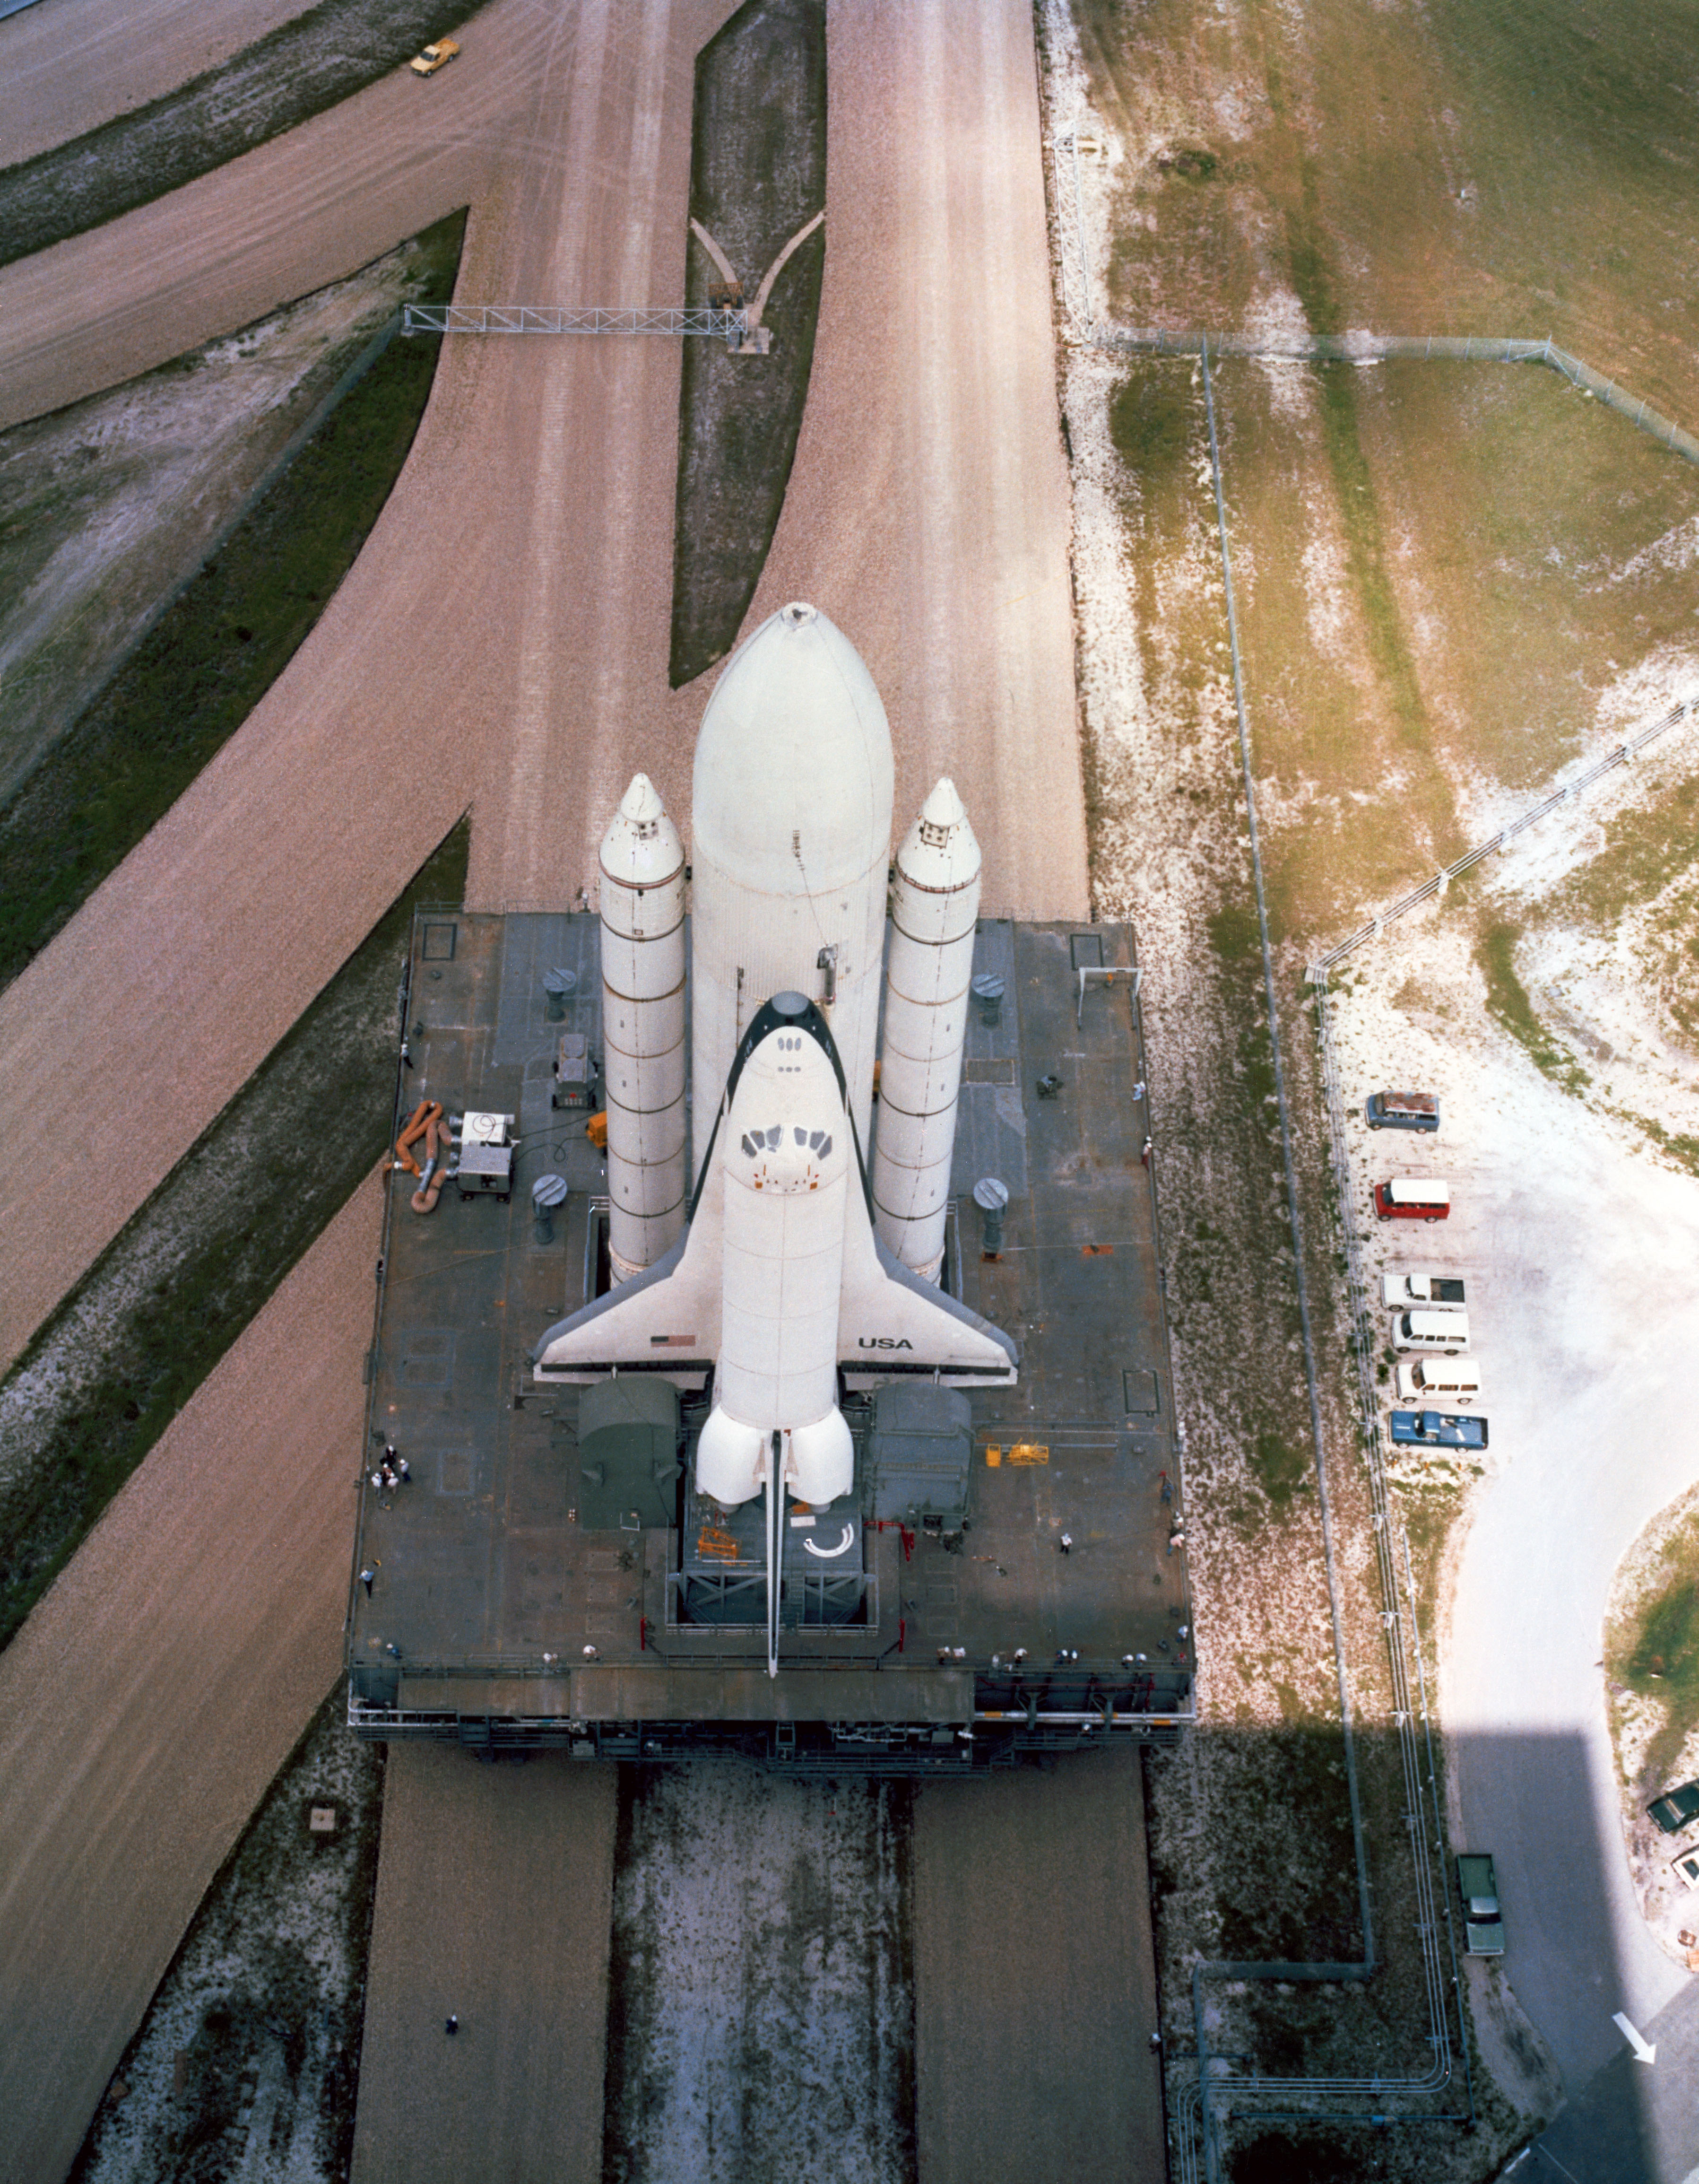 Enterprise rolls back into the Vehicle Assembly Building